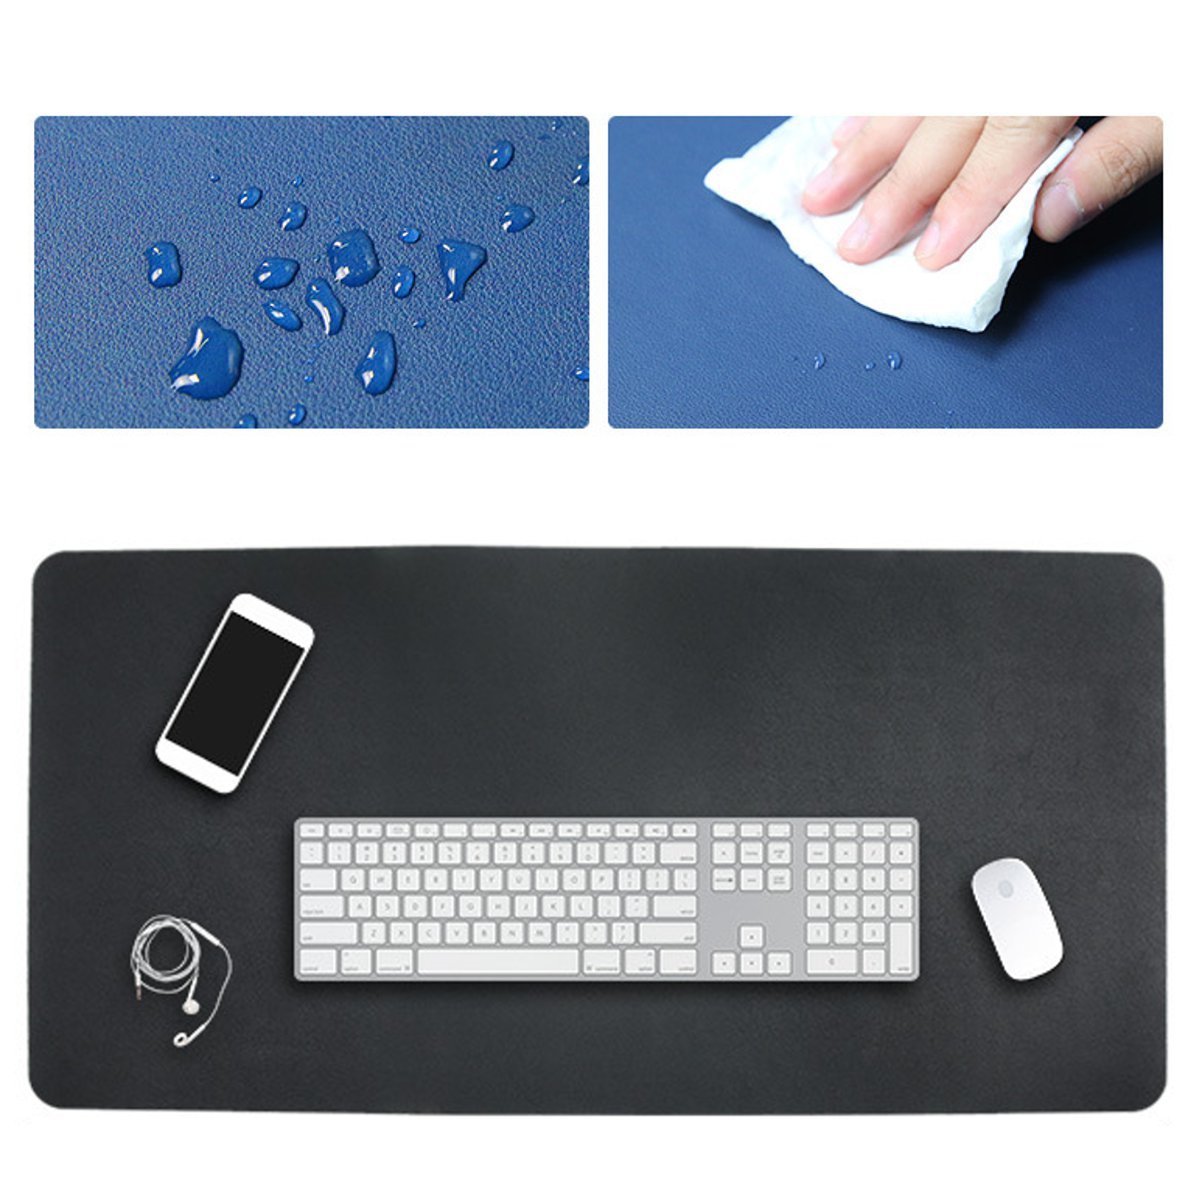 60x120cm Large Mouse Pad Both Sides Use Extra Large PU Leather Mouse Pad Mat Desktop Table Protective Mat for Home Office Gaming 1